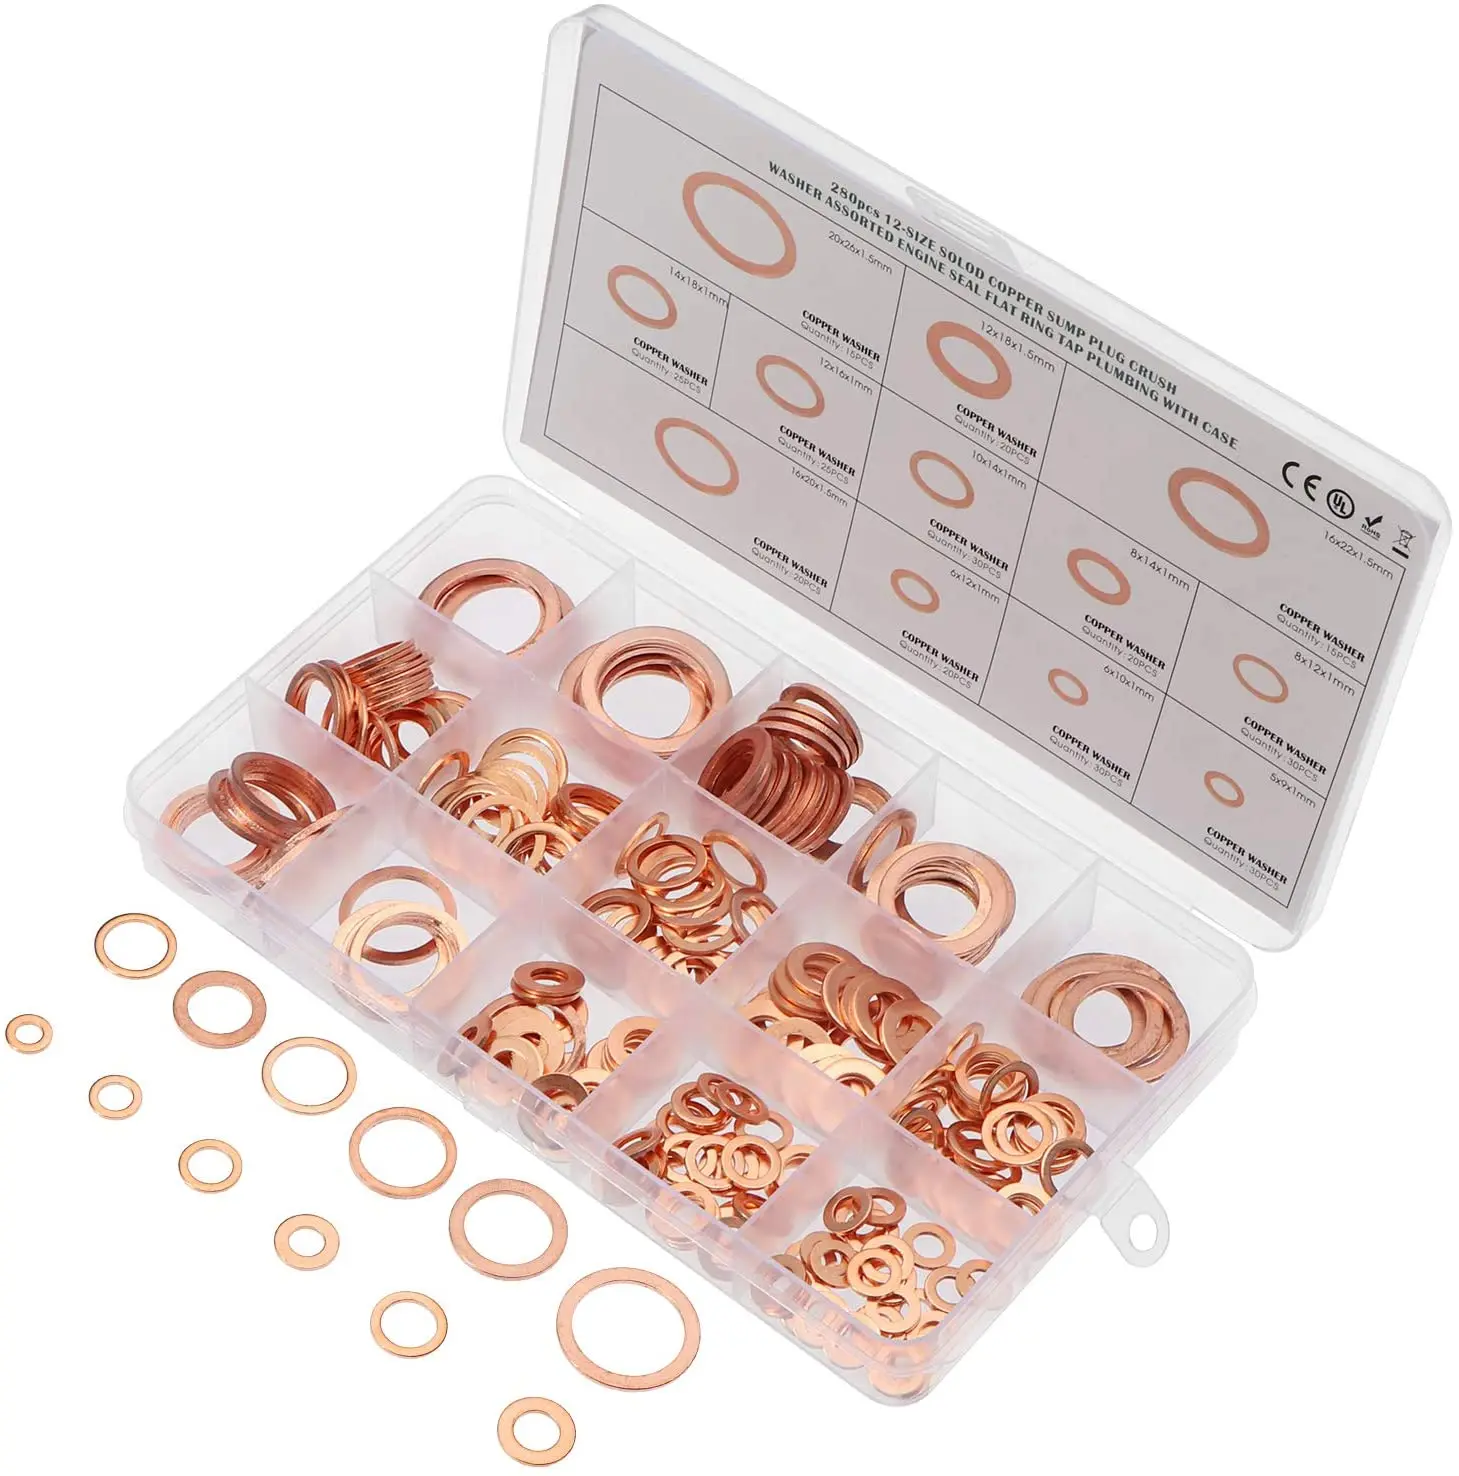 Solid Copper Washer Sealing Flat O-Ring Gaskets M5-M20 Assortment Set Durable 